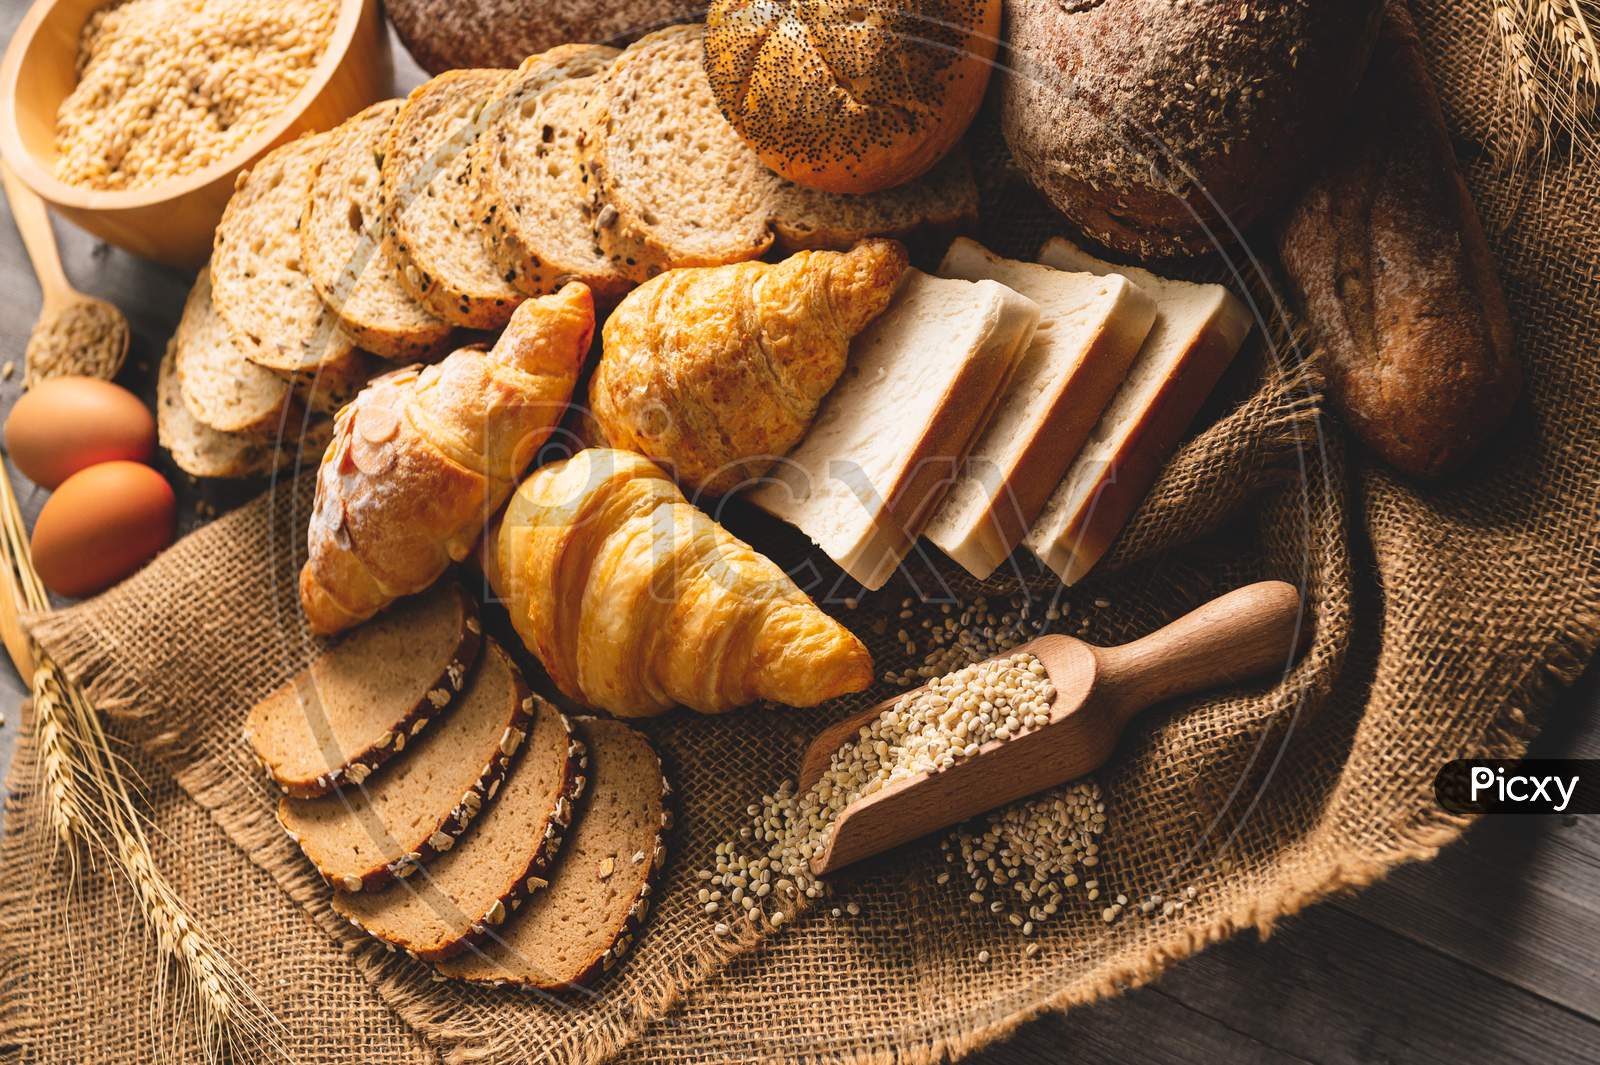 Different Kinds Of Bread With Nutrition Whole Grains On Wooden Background. Food And Bakery In Kitchen Concept. Delicious Breakfast Gouemet And Meal. Top View Angle